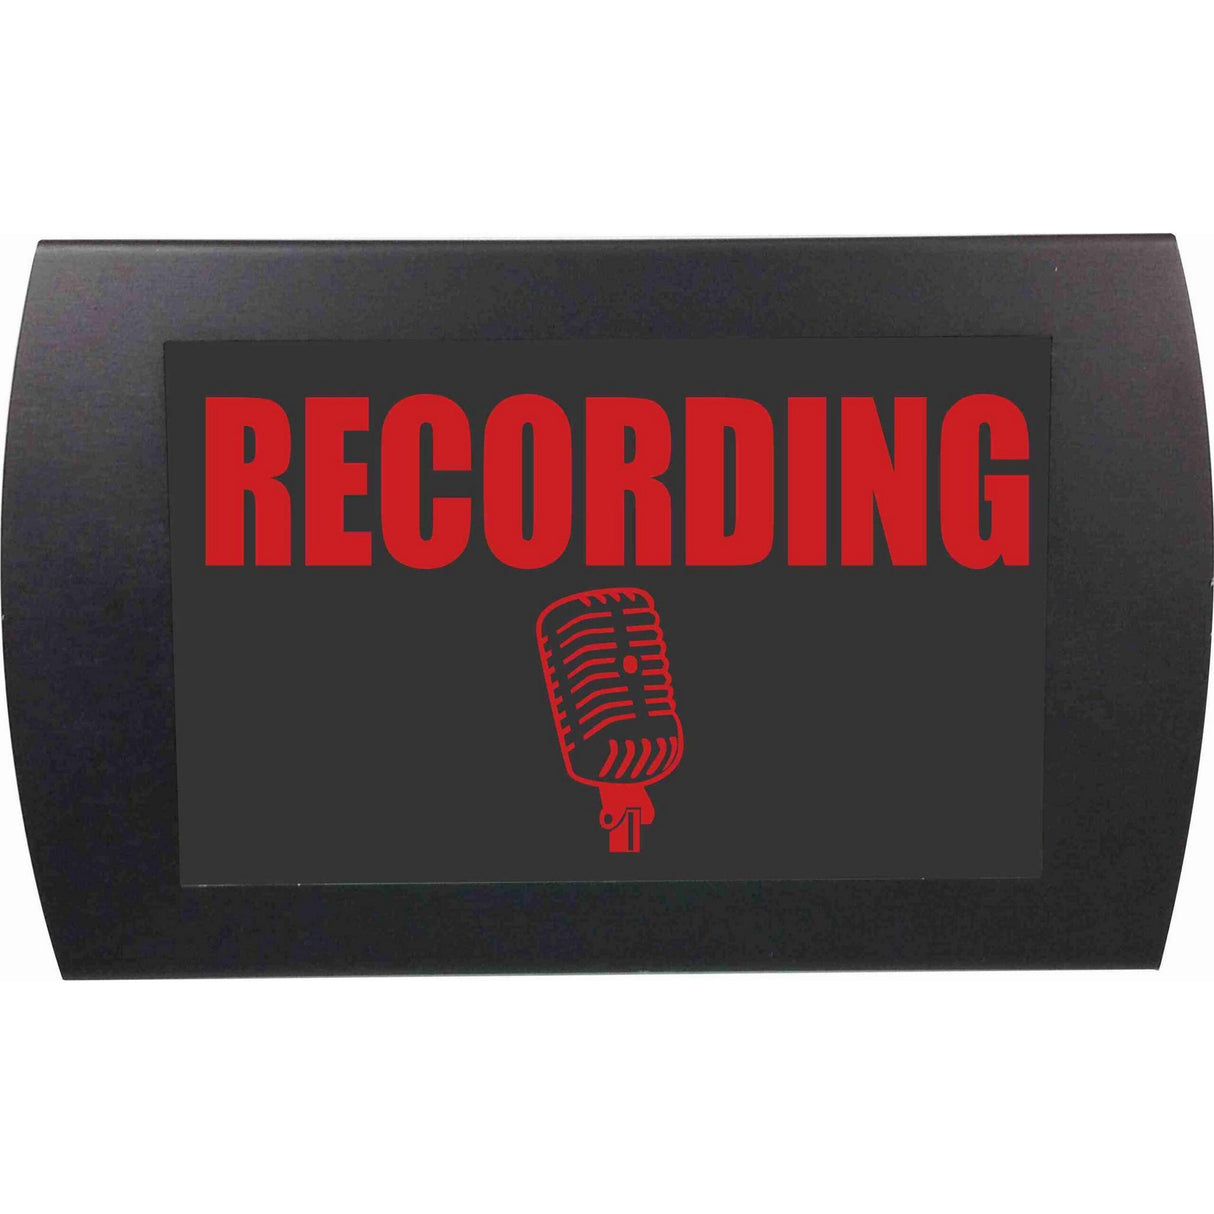 American Recorder OAS-2002M-RD "RECORDING" LED Lighted Sign, Red